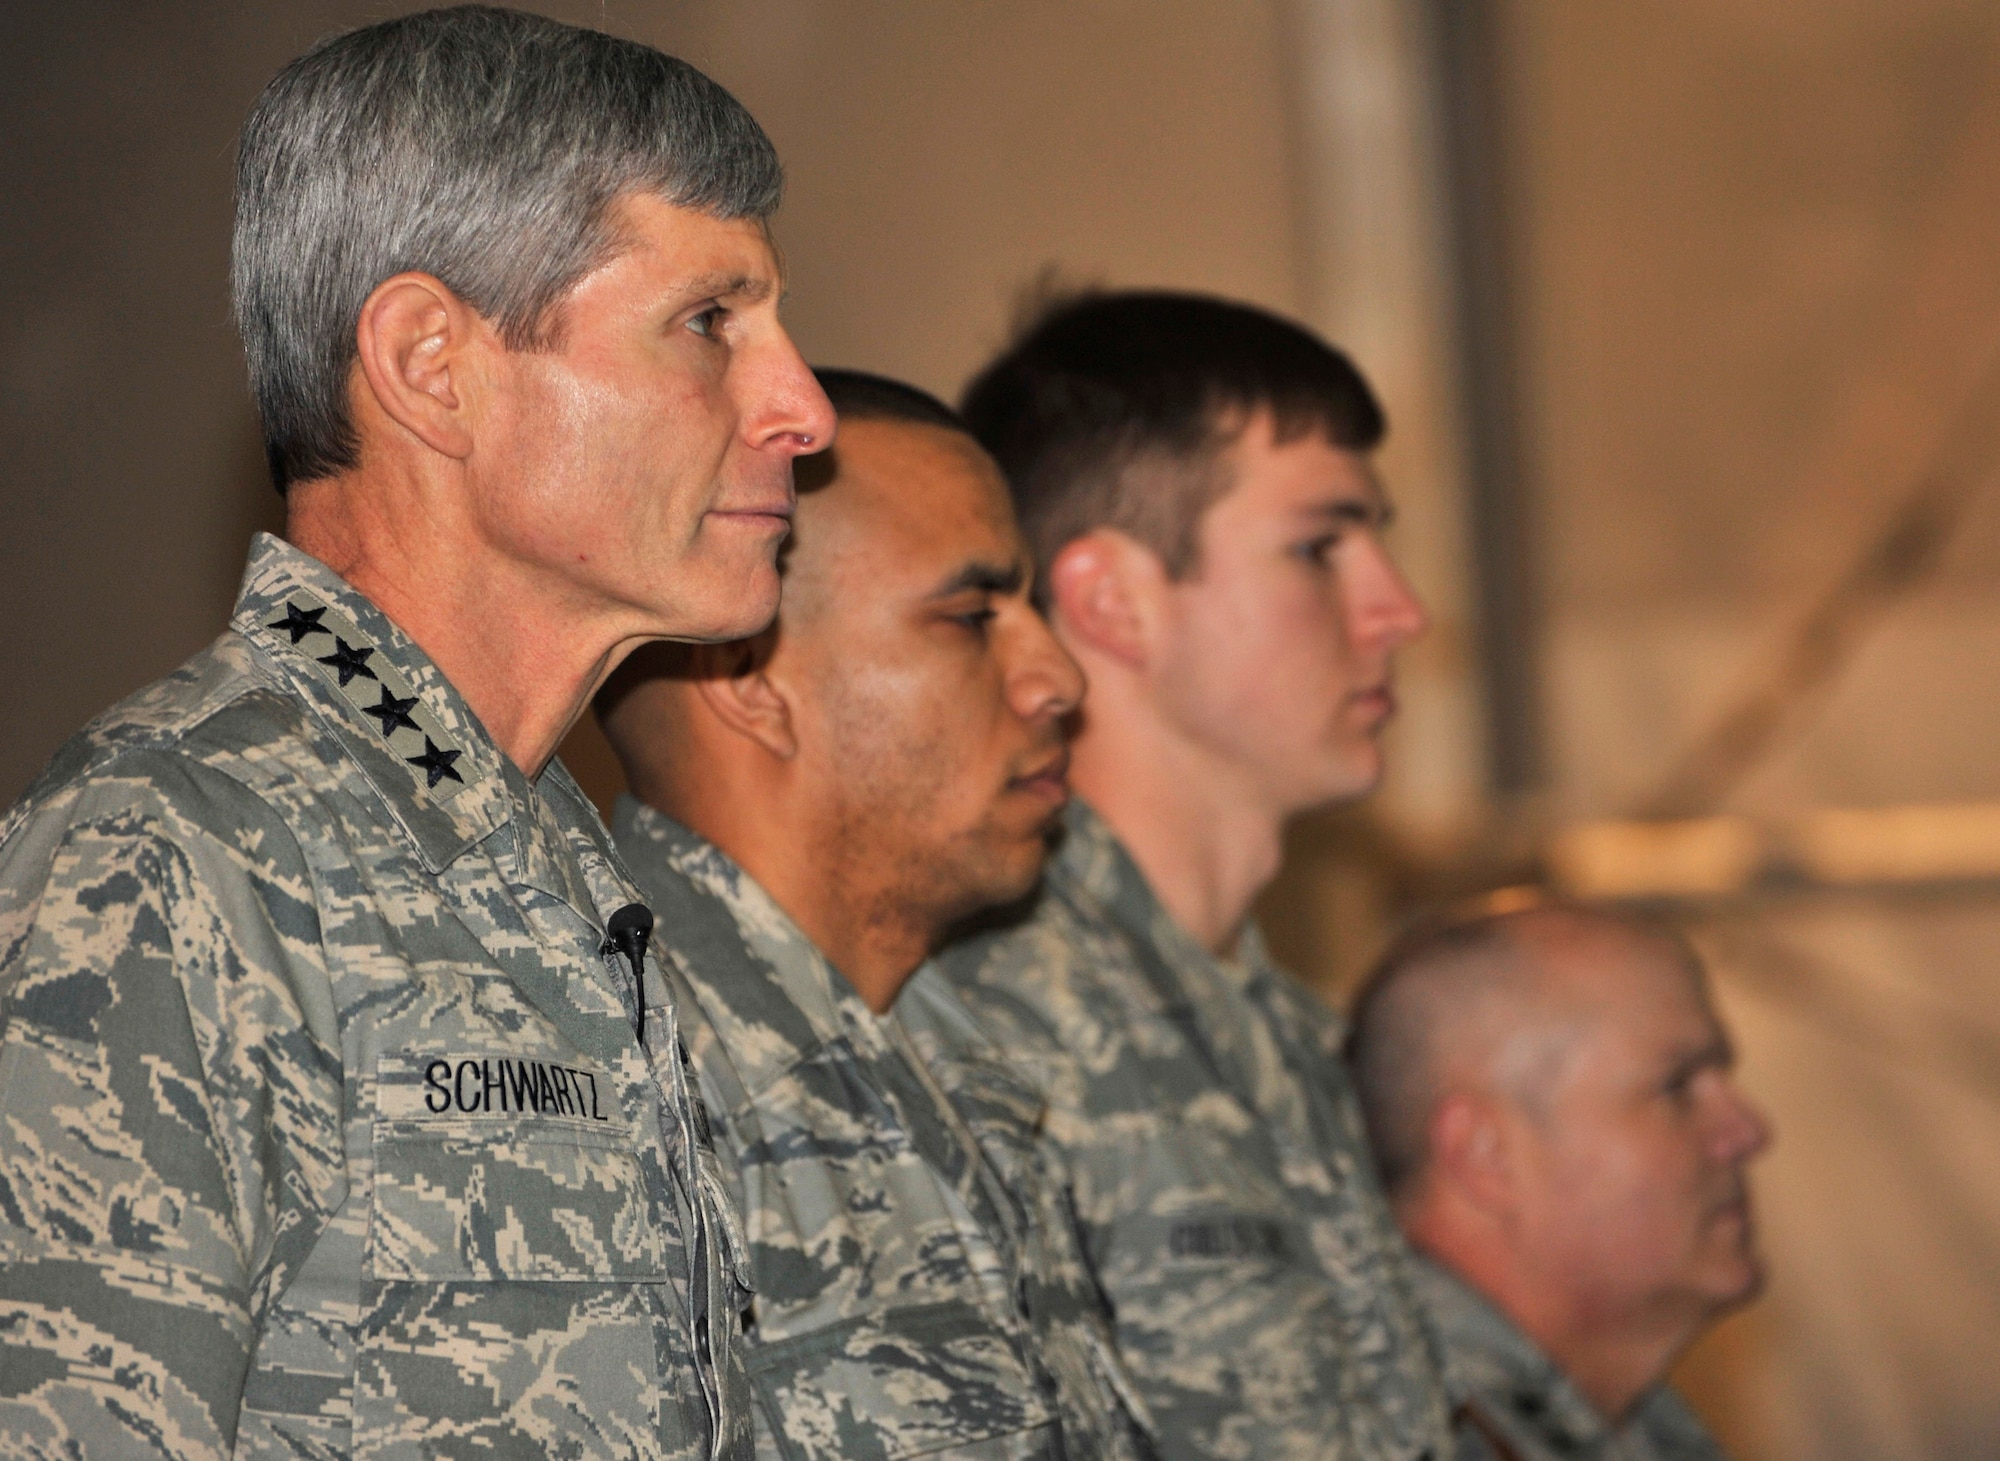 (From left) Gen. Norton Schwartz, Air Force chief of staff; Capt. Gil Wyche, a security forces officer assigned to the 966th Air Expeditionary Squadron; Senior Airman Brandon Cullen Towle, a joint terminal attack controller assigned to the 817th Expeditionary Air Support Operations Squadron; and Maj. Gen. Charles W. Lyon, 9th Air and Space Expeditionary Task Force-Afghanistan commander, stand at attention during a Purple Heart presentation ceremony at Bagram Airfield, Afghanistan, on Jan. 19, 2011.  General Schwartz presented Captain Wyche and Airman Cullen Towle with Purple Hearts during the ceremony. (U.S. Air Force photo/Capt. Erick Saks)